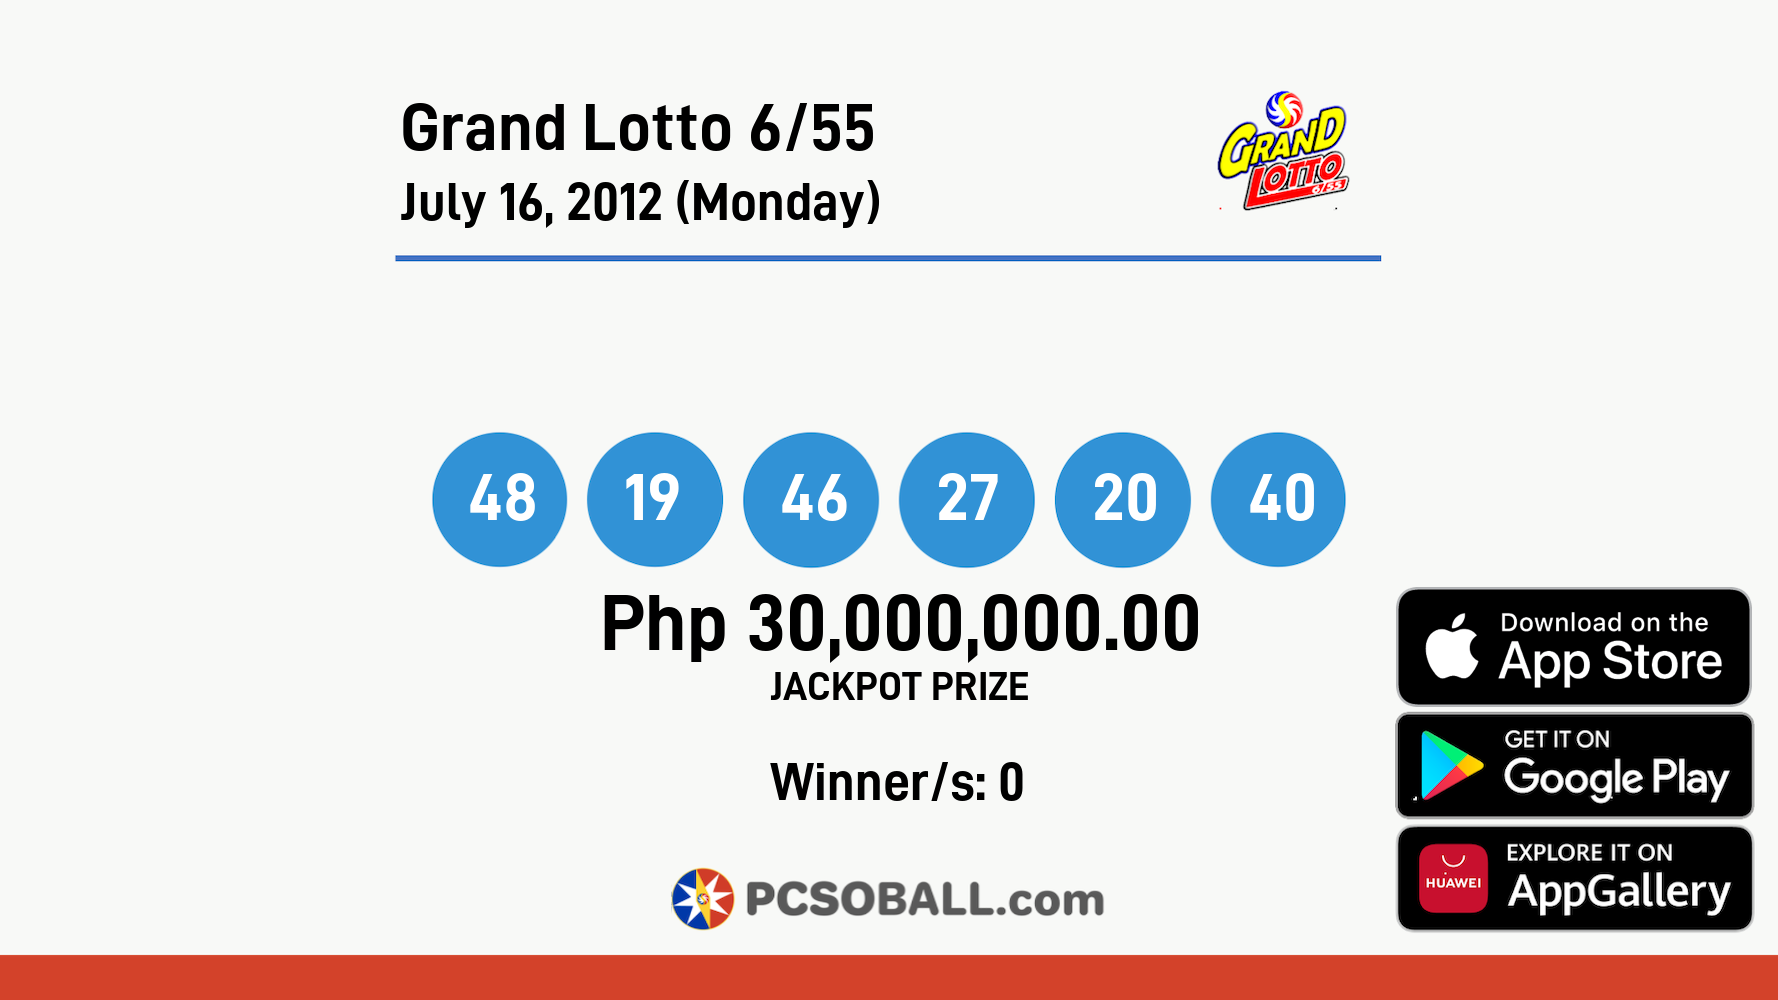 Grand Lotto 6/55 July 16, 2012 (Monday) Result